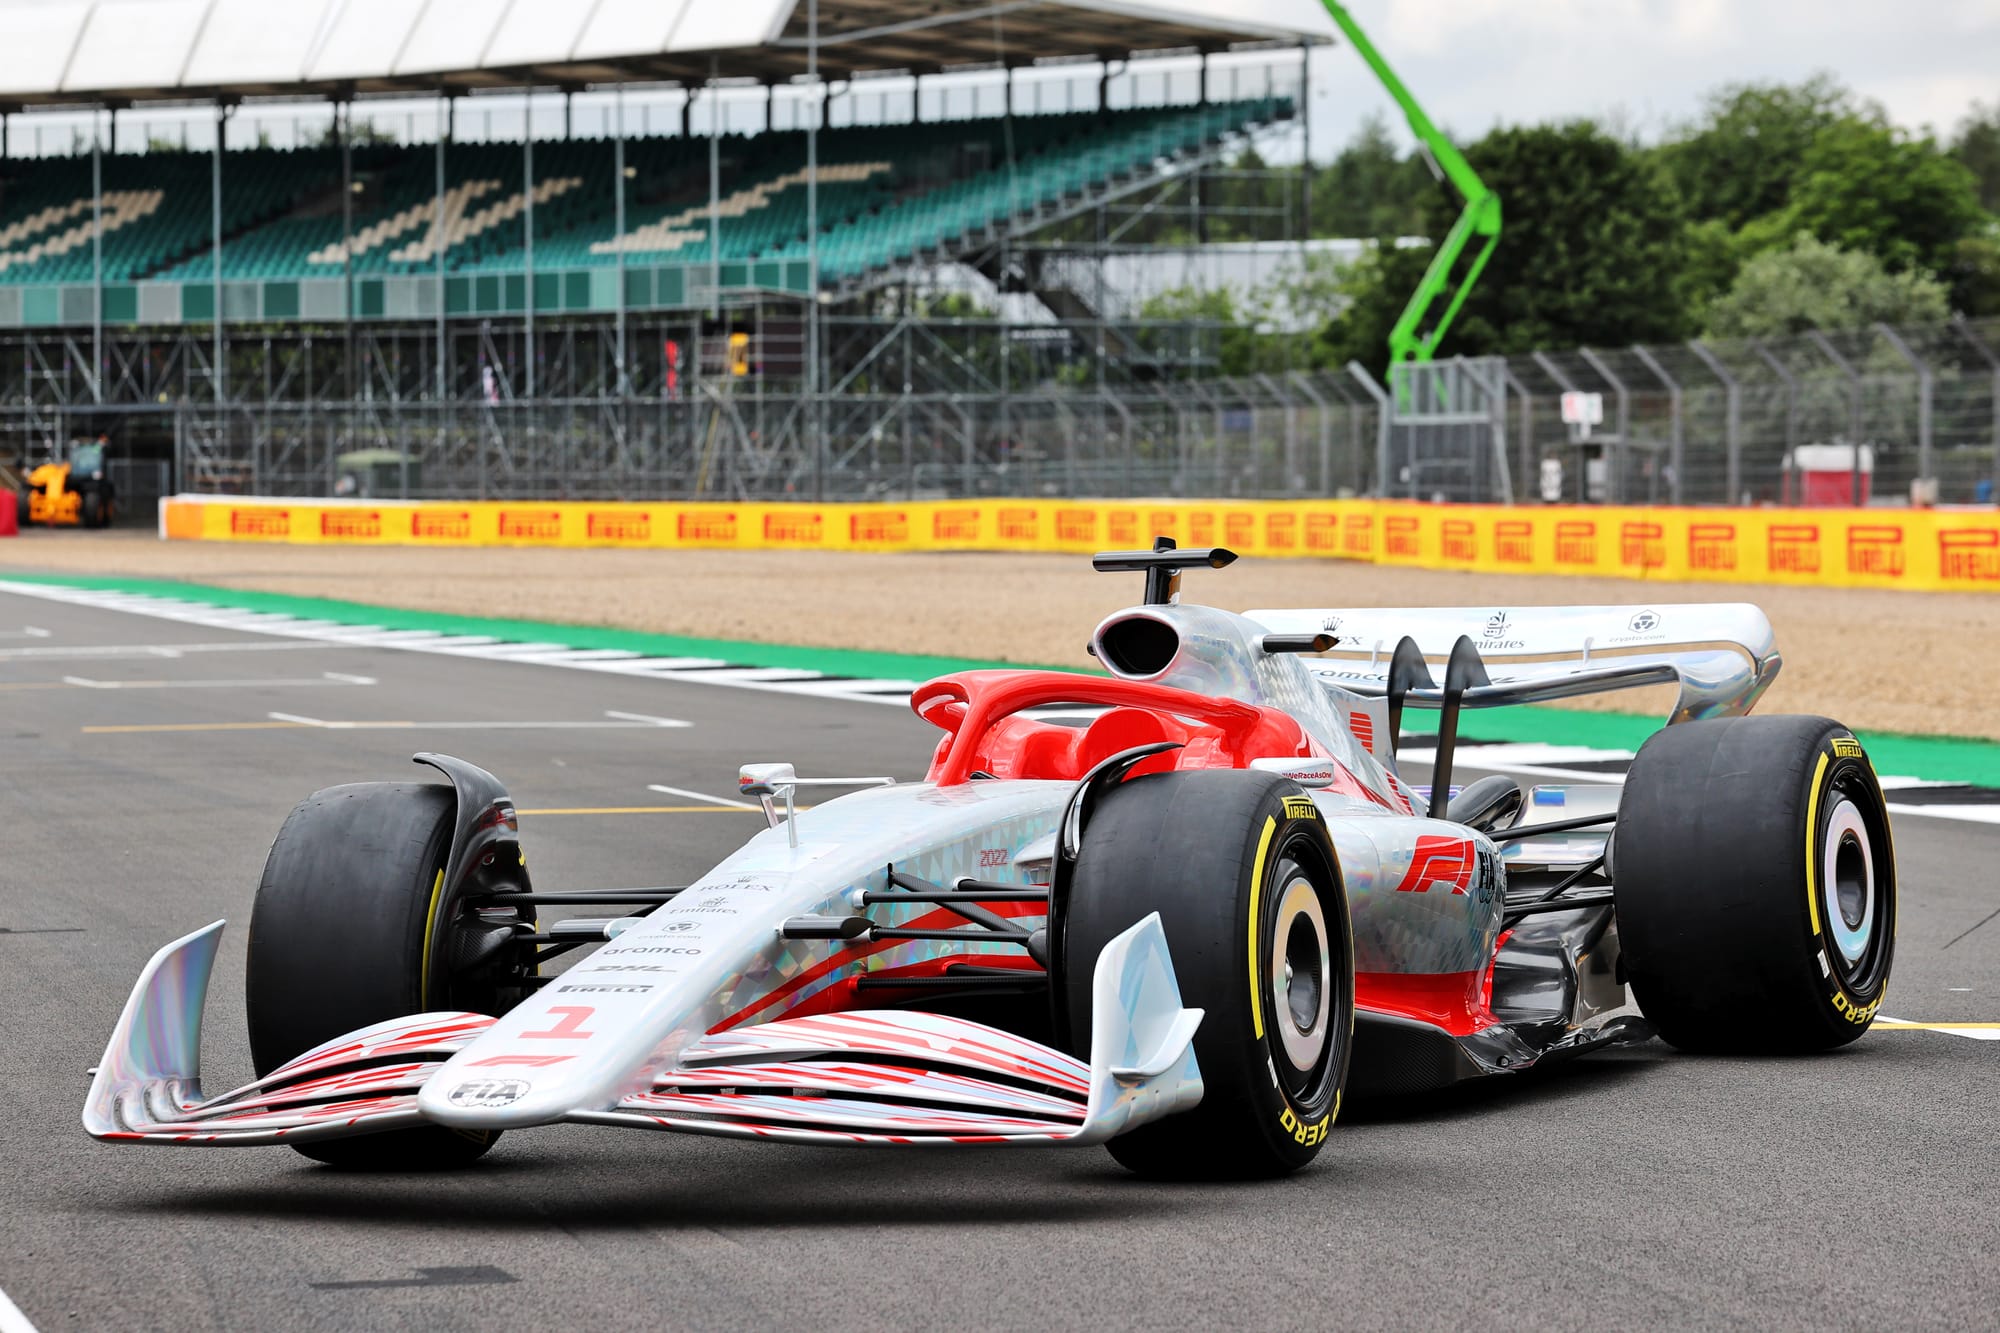 F1 2022 rules show the car in 2021